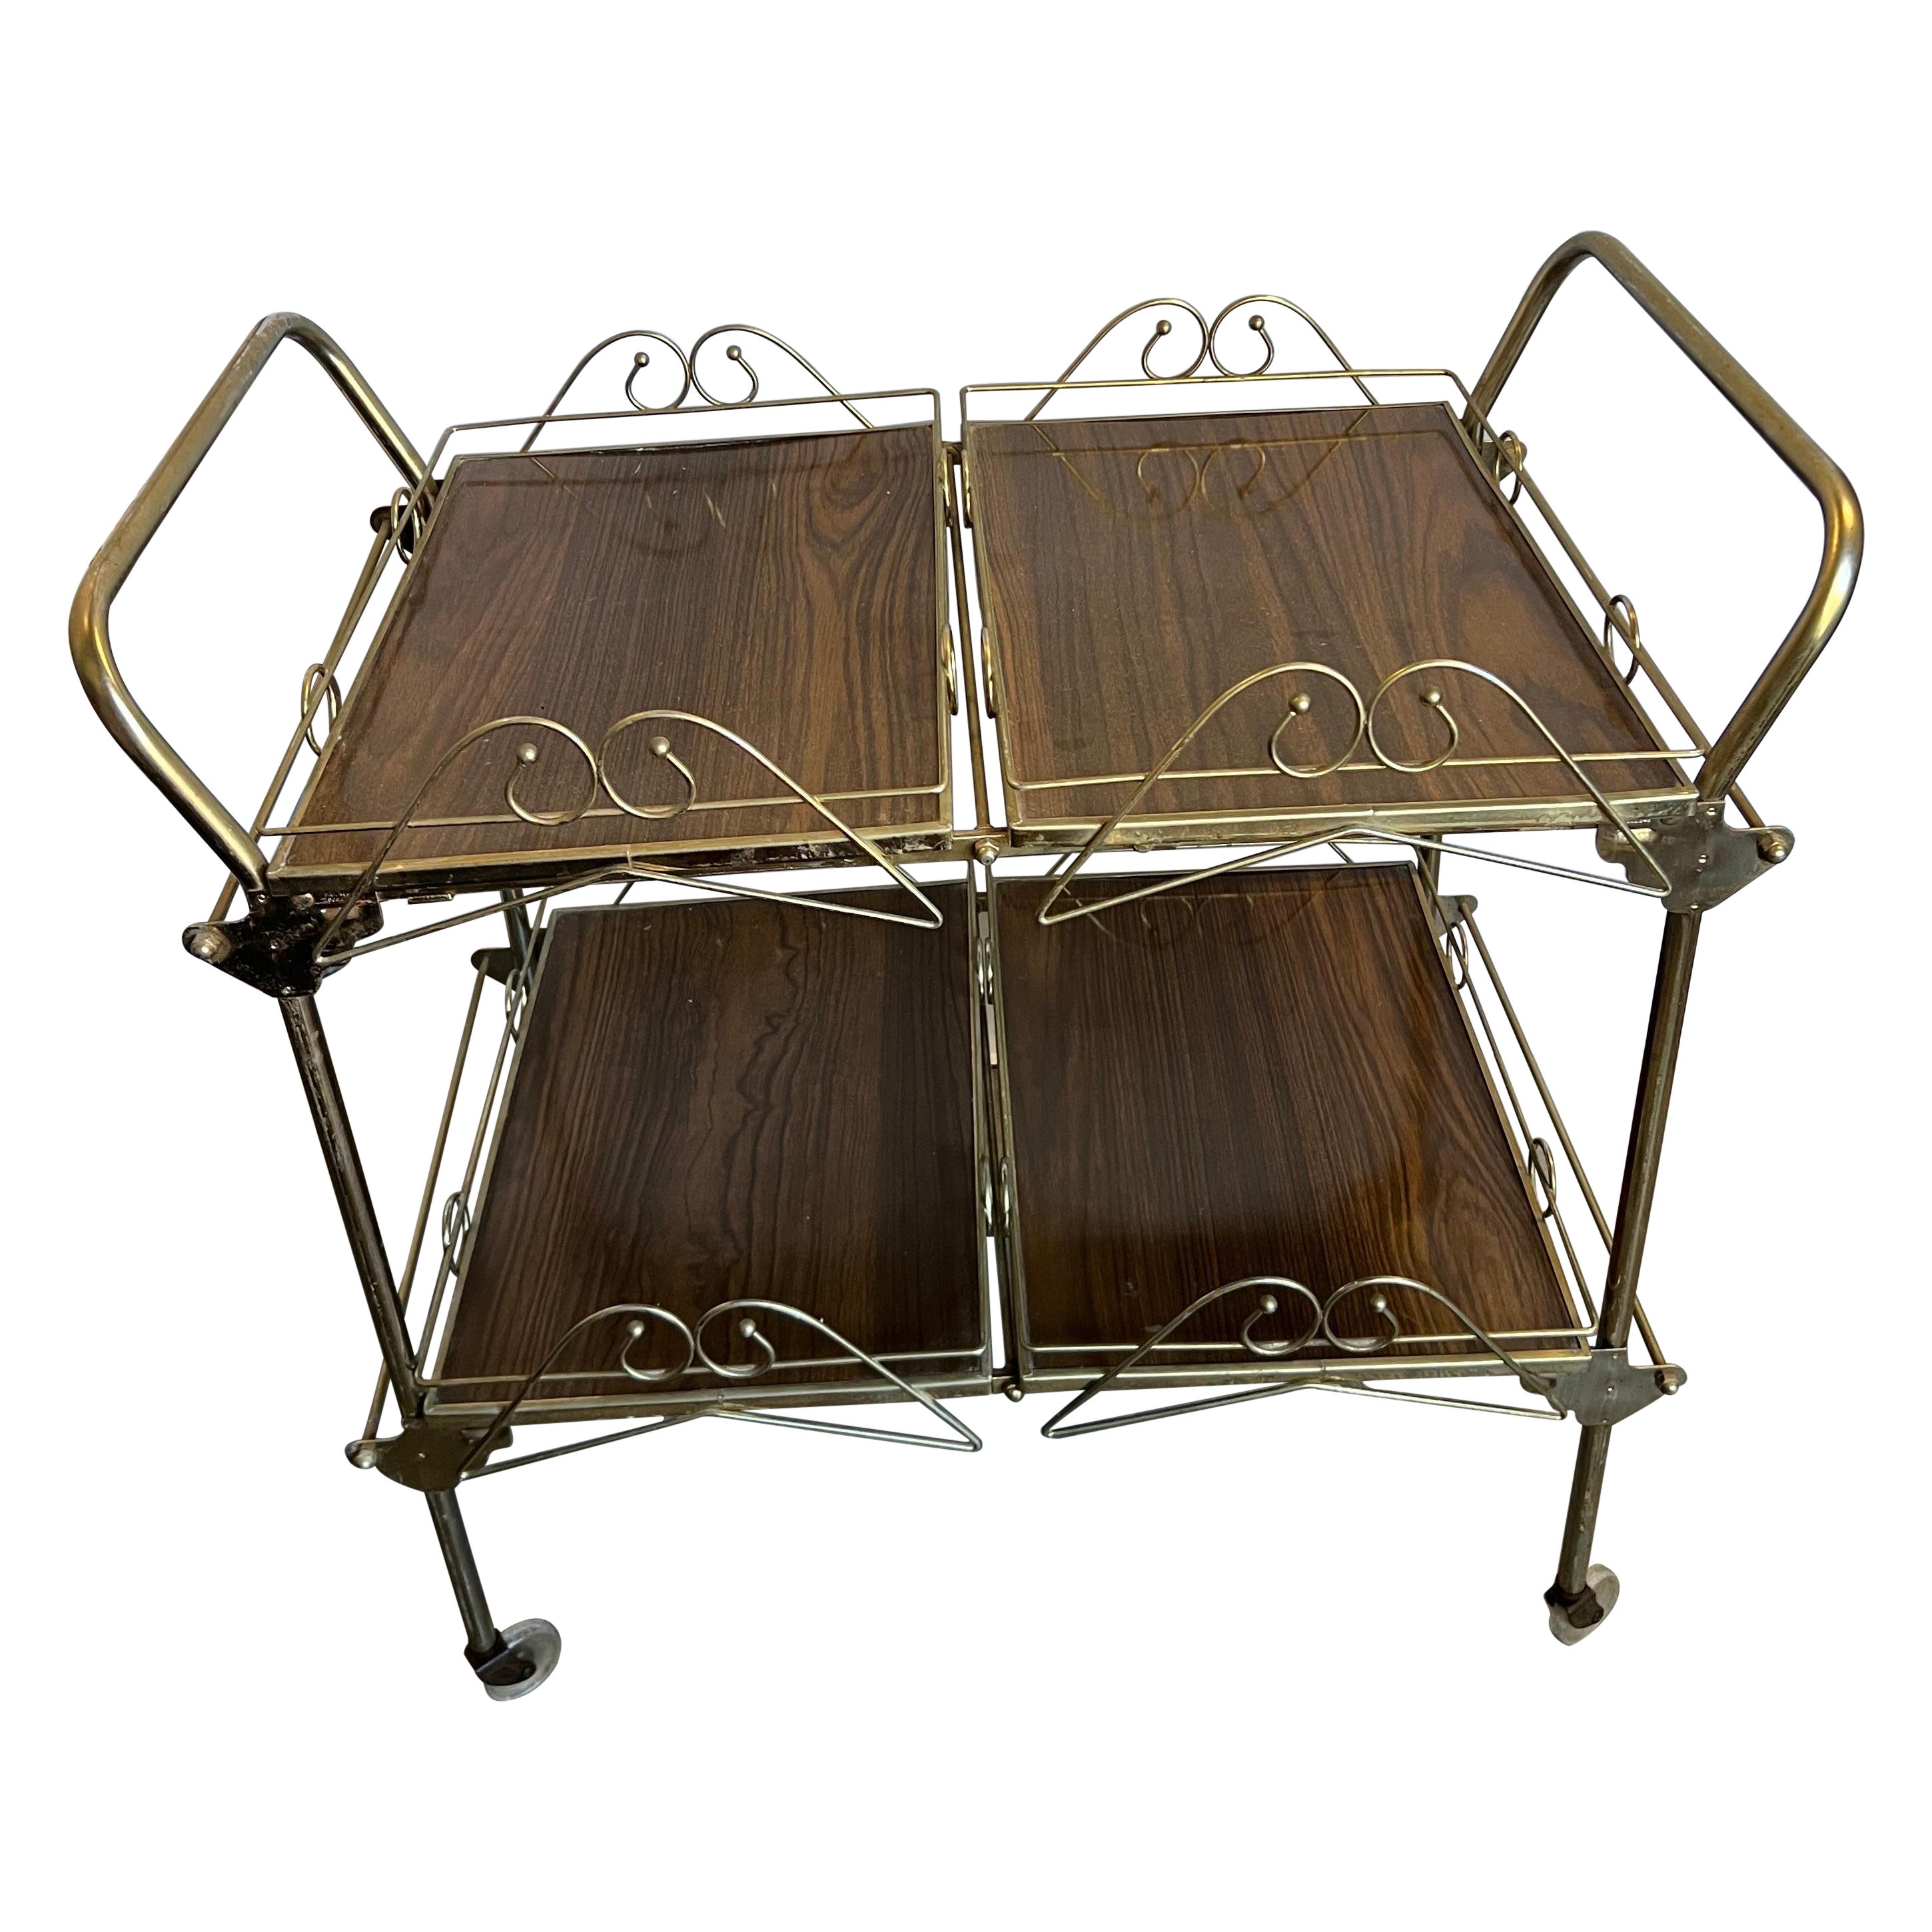 Mid-20th Century Hollywood Regency Brass and Walnut Tone Serving Cart For Sale